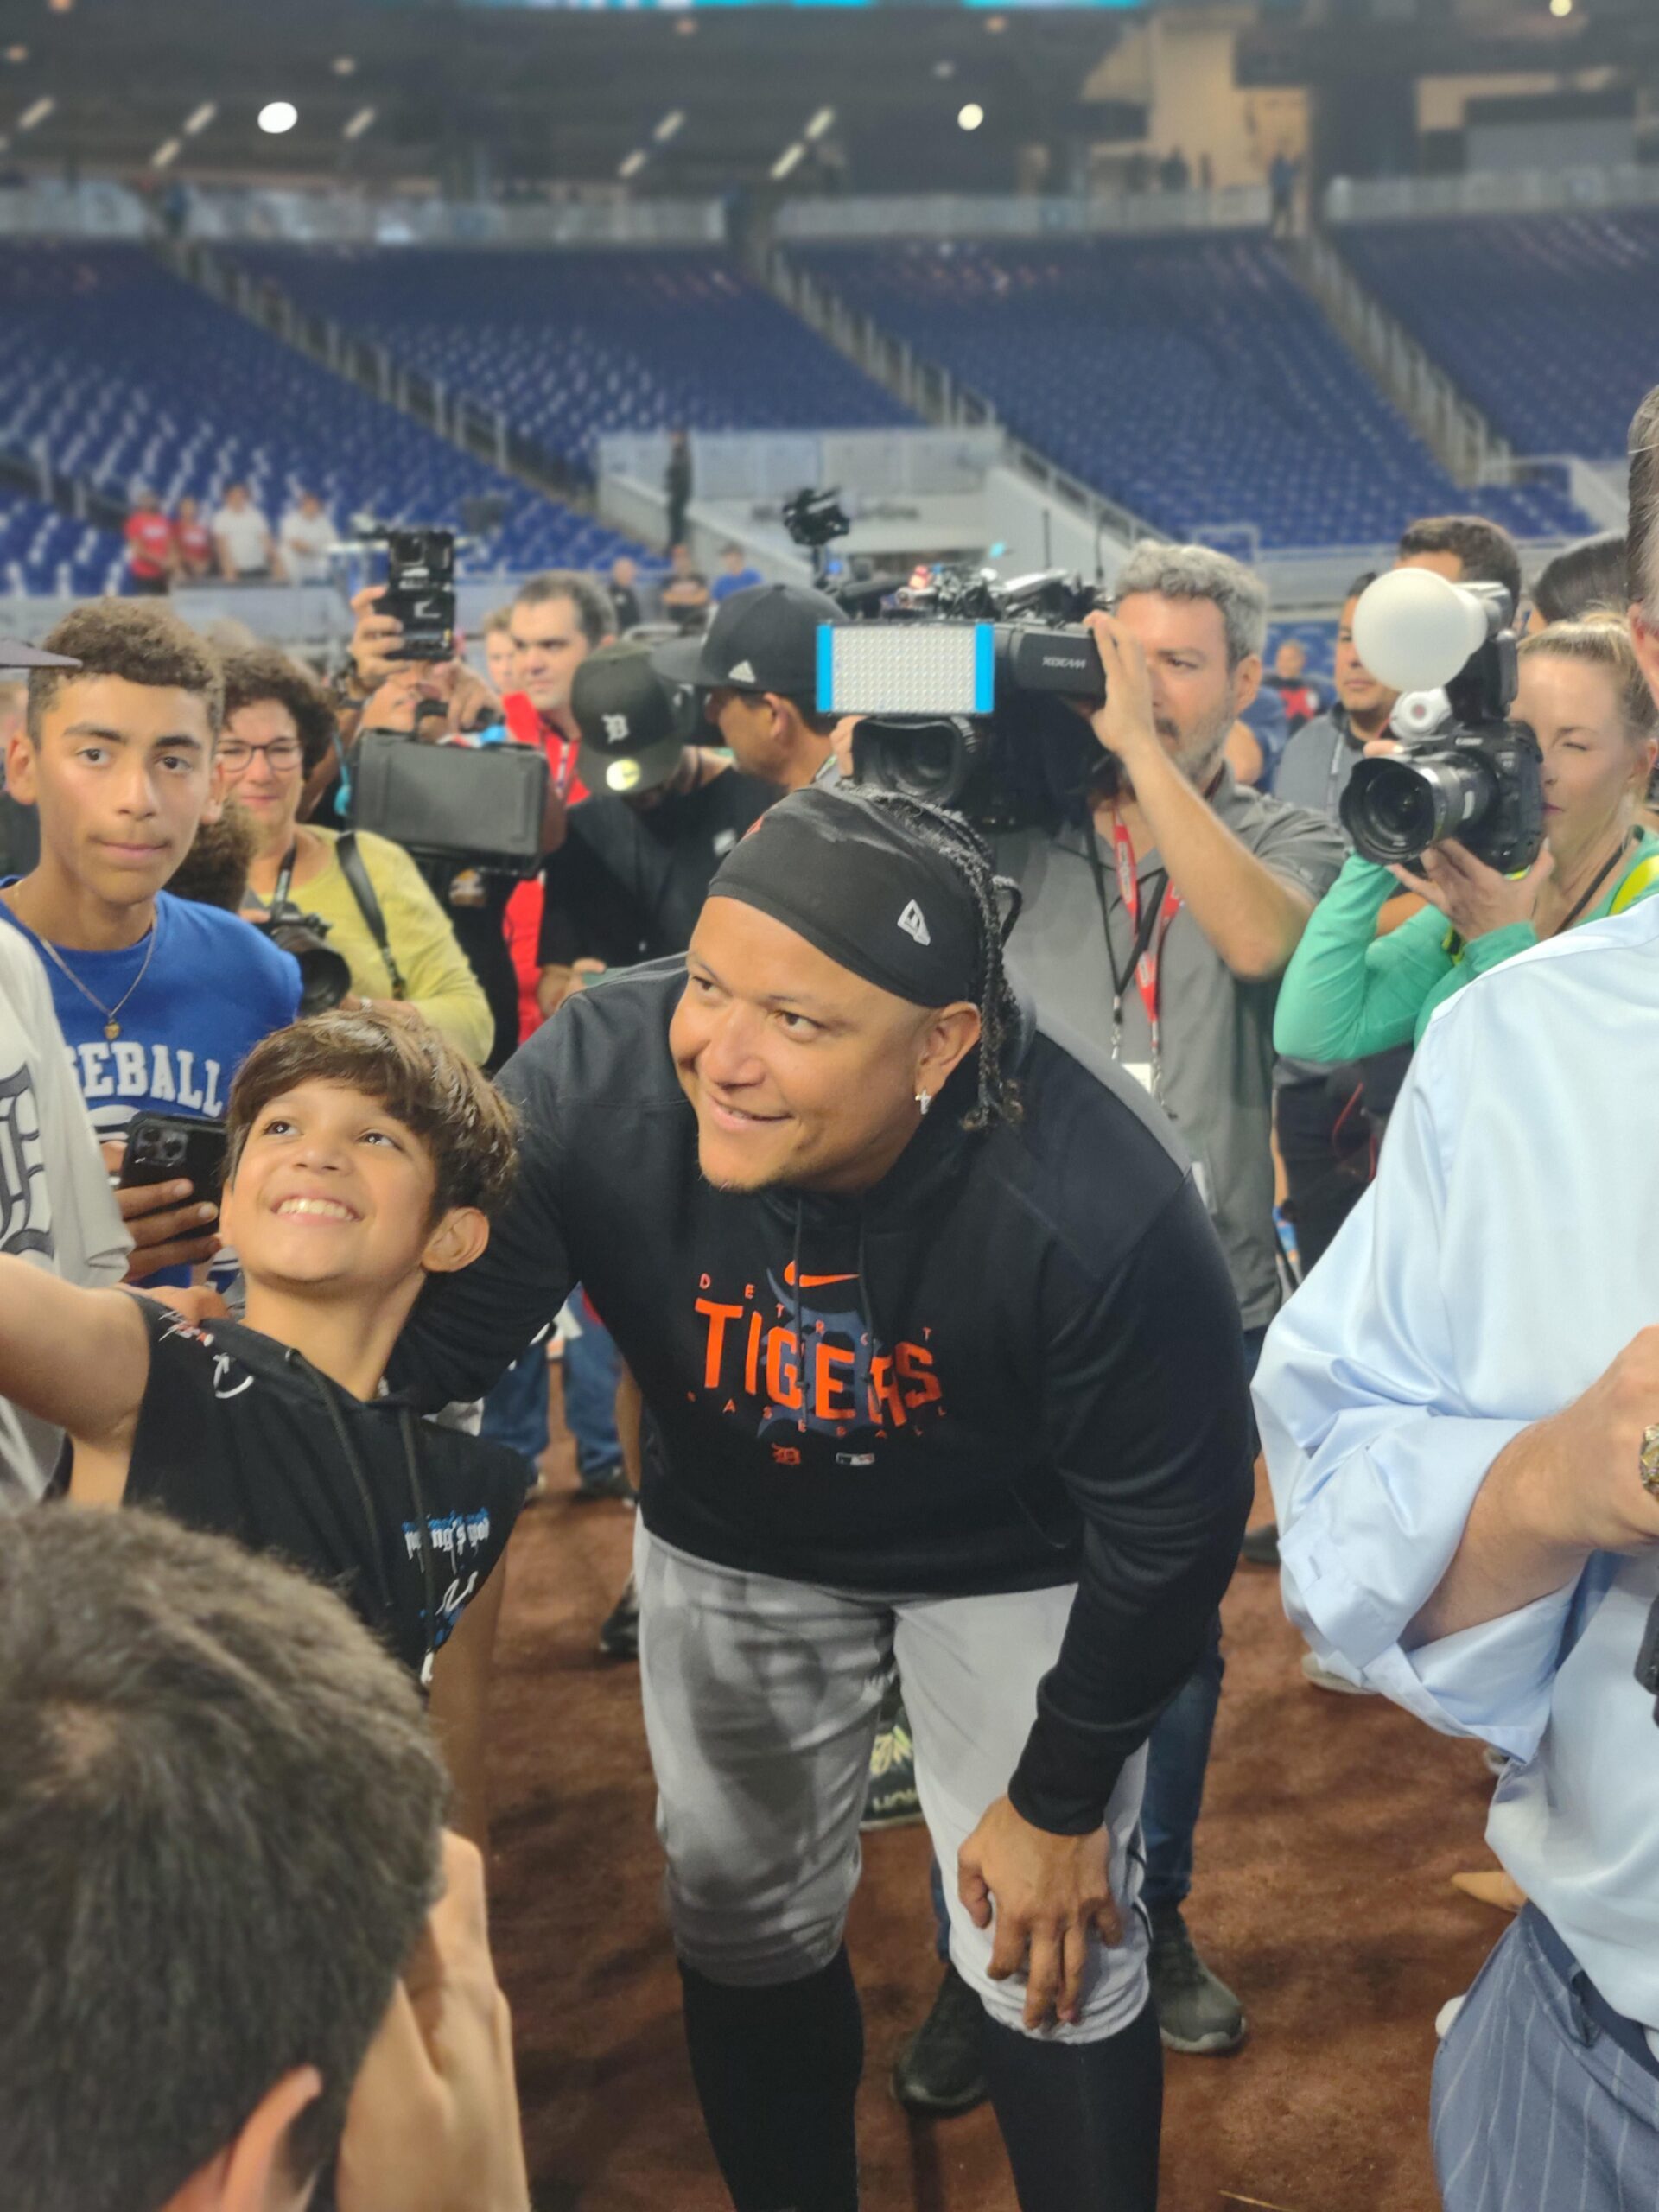 In his return to Miami, Miggy got a warm ovation from Marlins fans